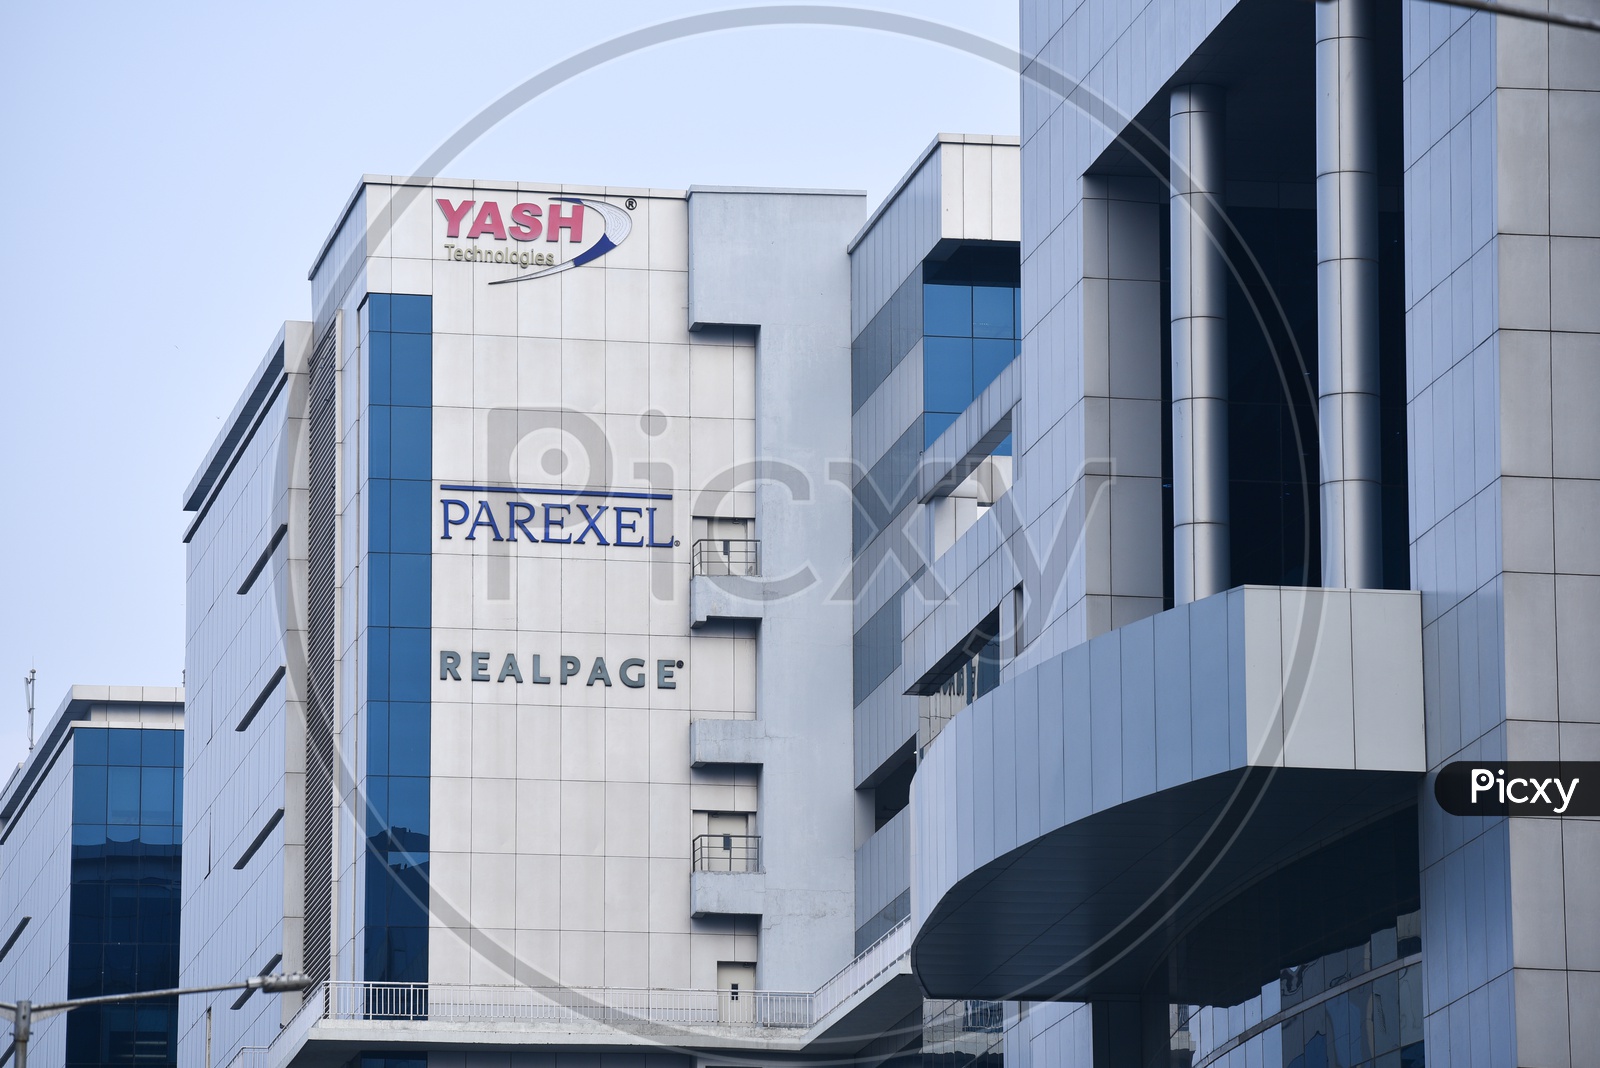 Yash Technologies  , Real Page and Parexel  Name Board On Corporate Building